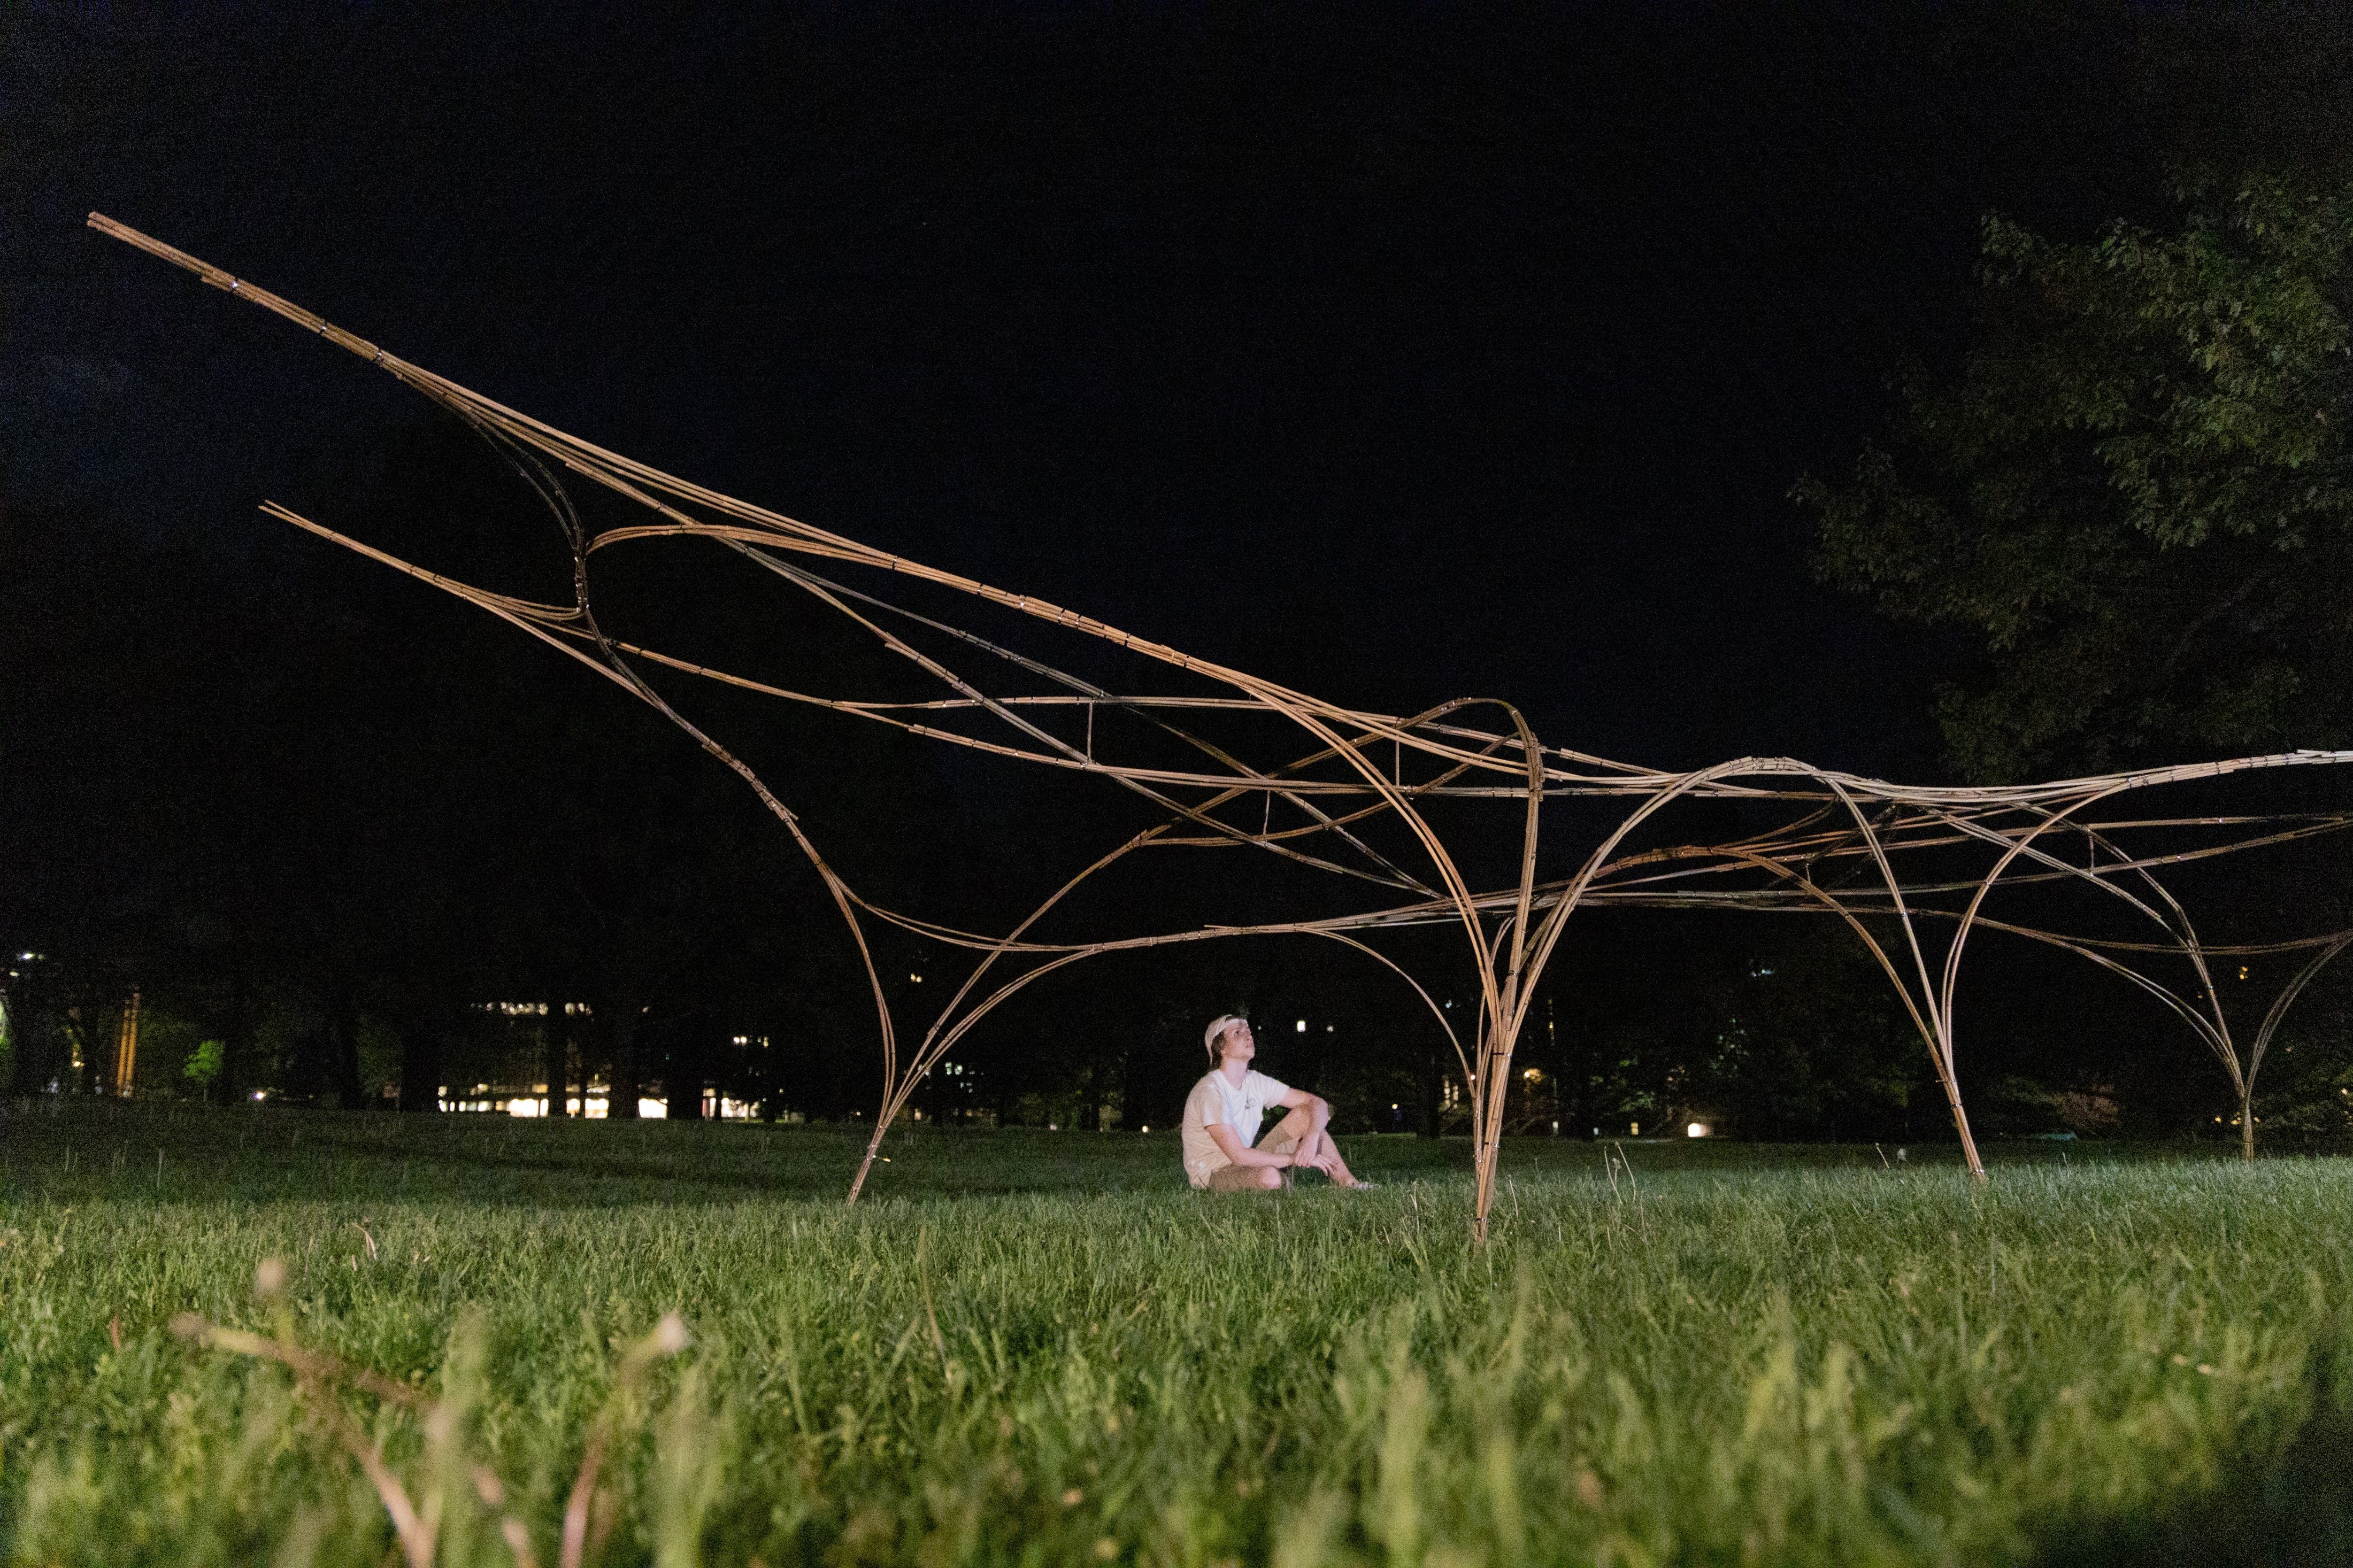 The design and fabrication of a reconfigurable modular bamboo system